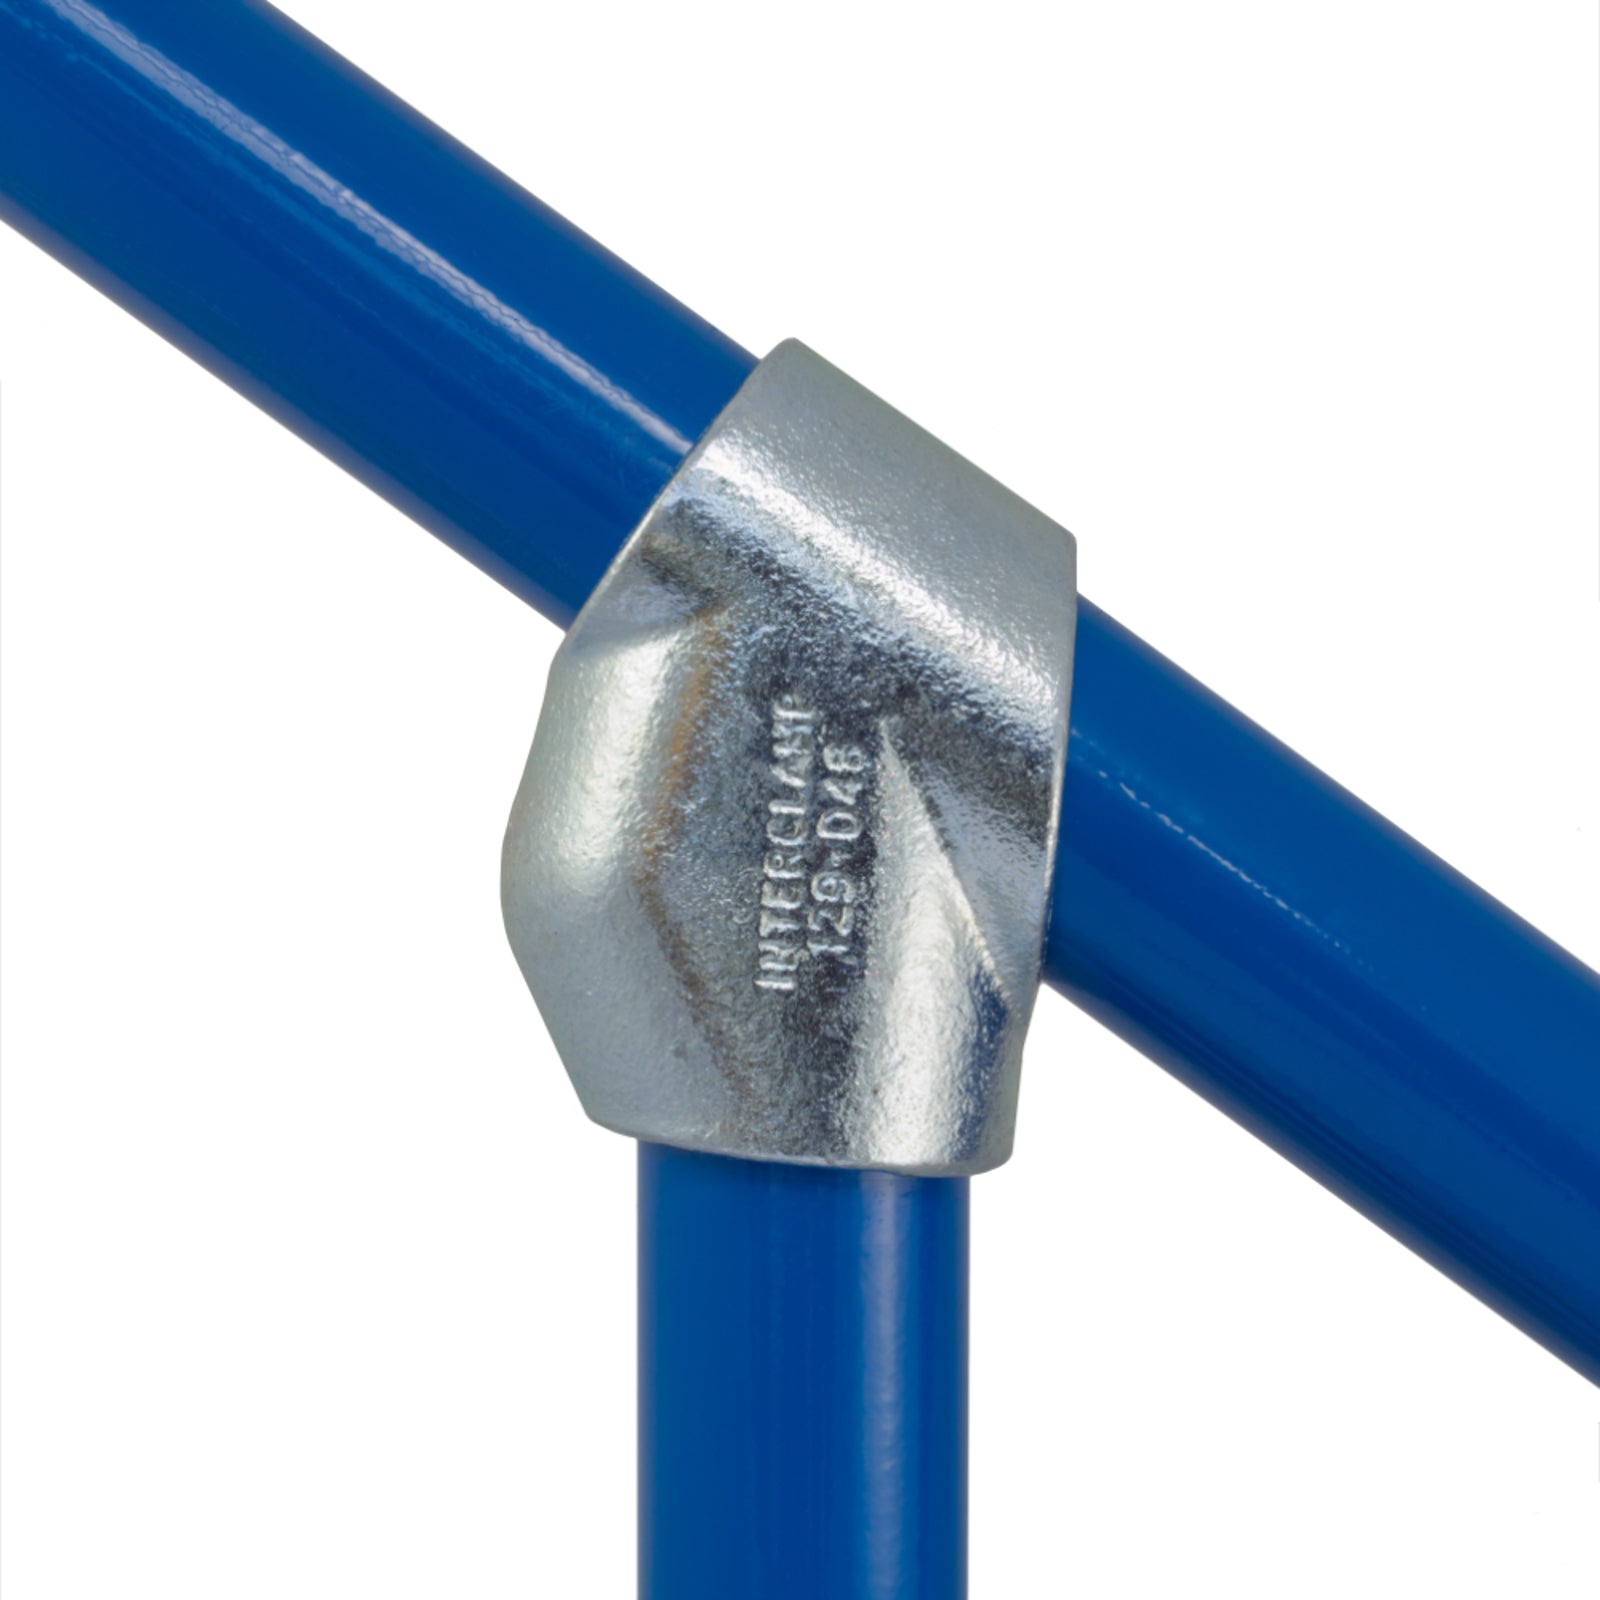 Adjustable Short T (Adjustable Short Tee), 30 to 60 Degrees for Galvanised Pipe (Interclamp Code 129). Shop online chain.com.au. Australia wide shipping.